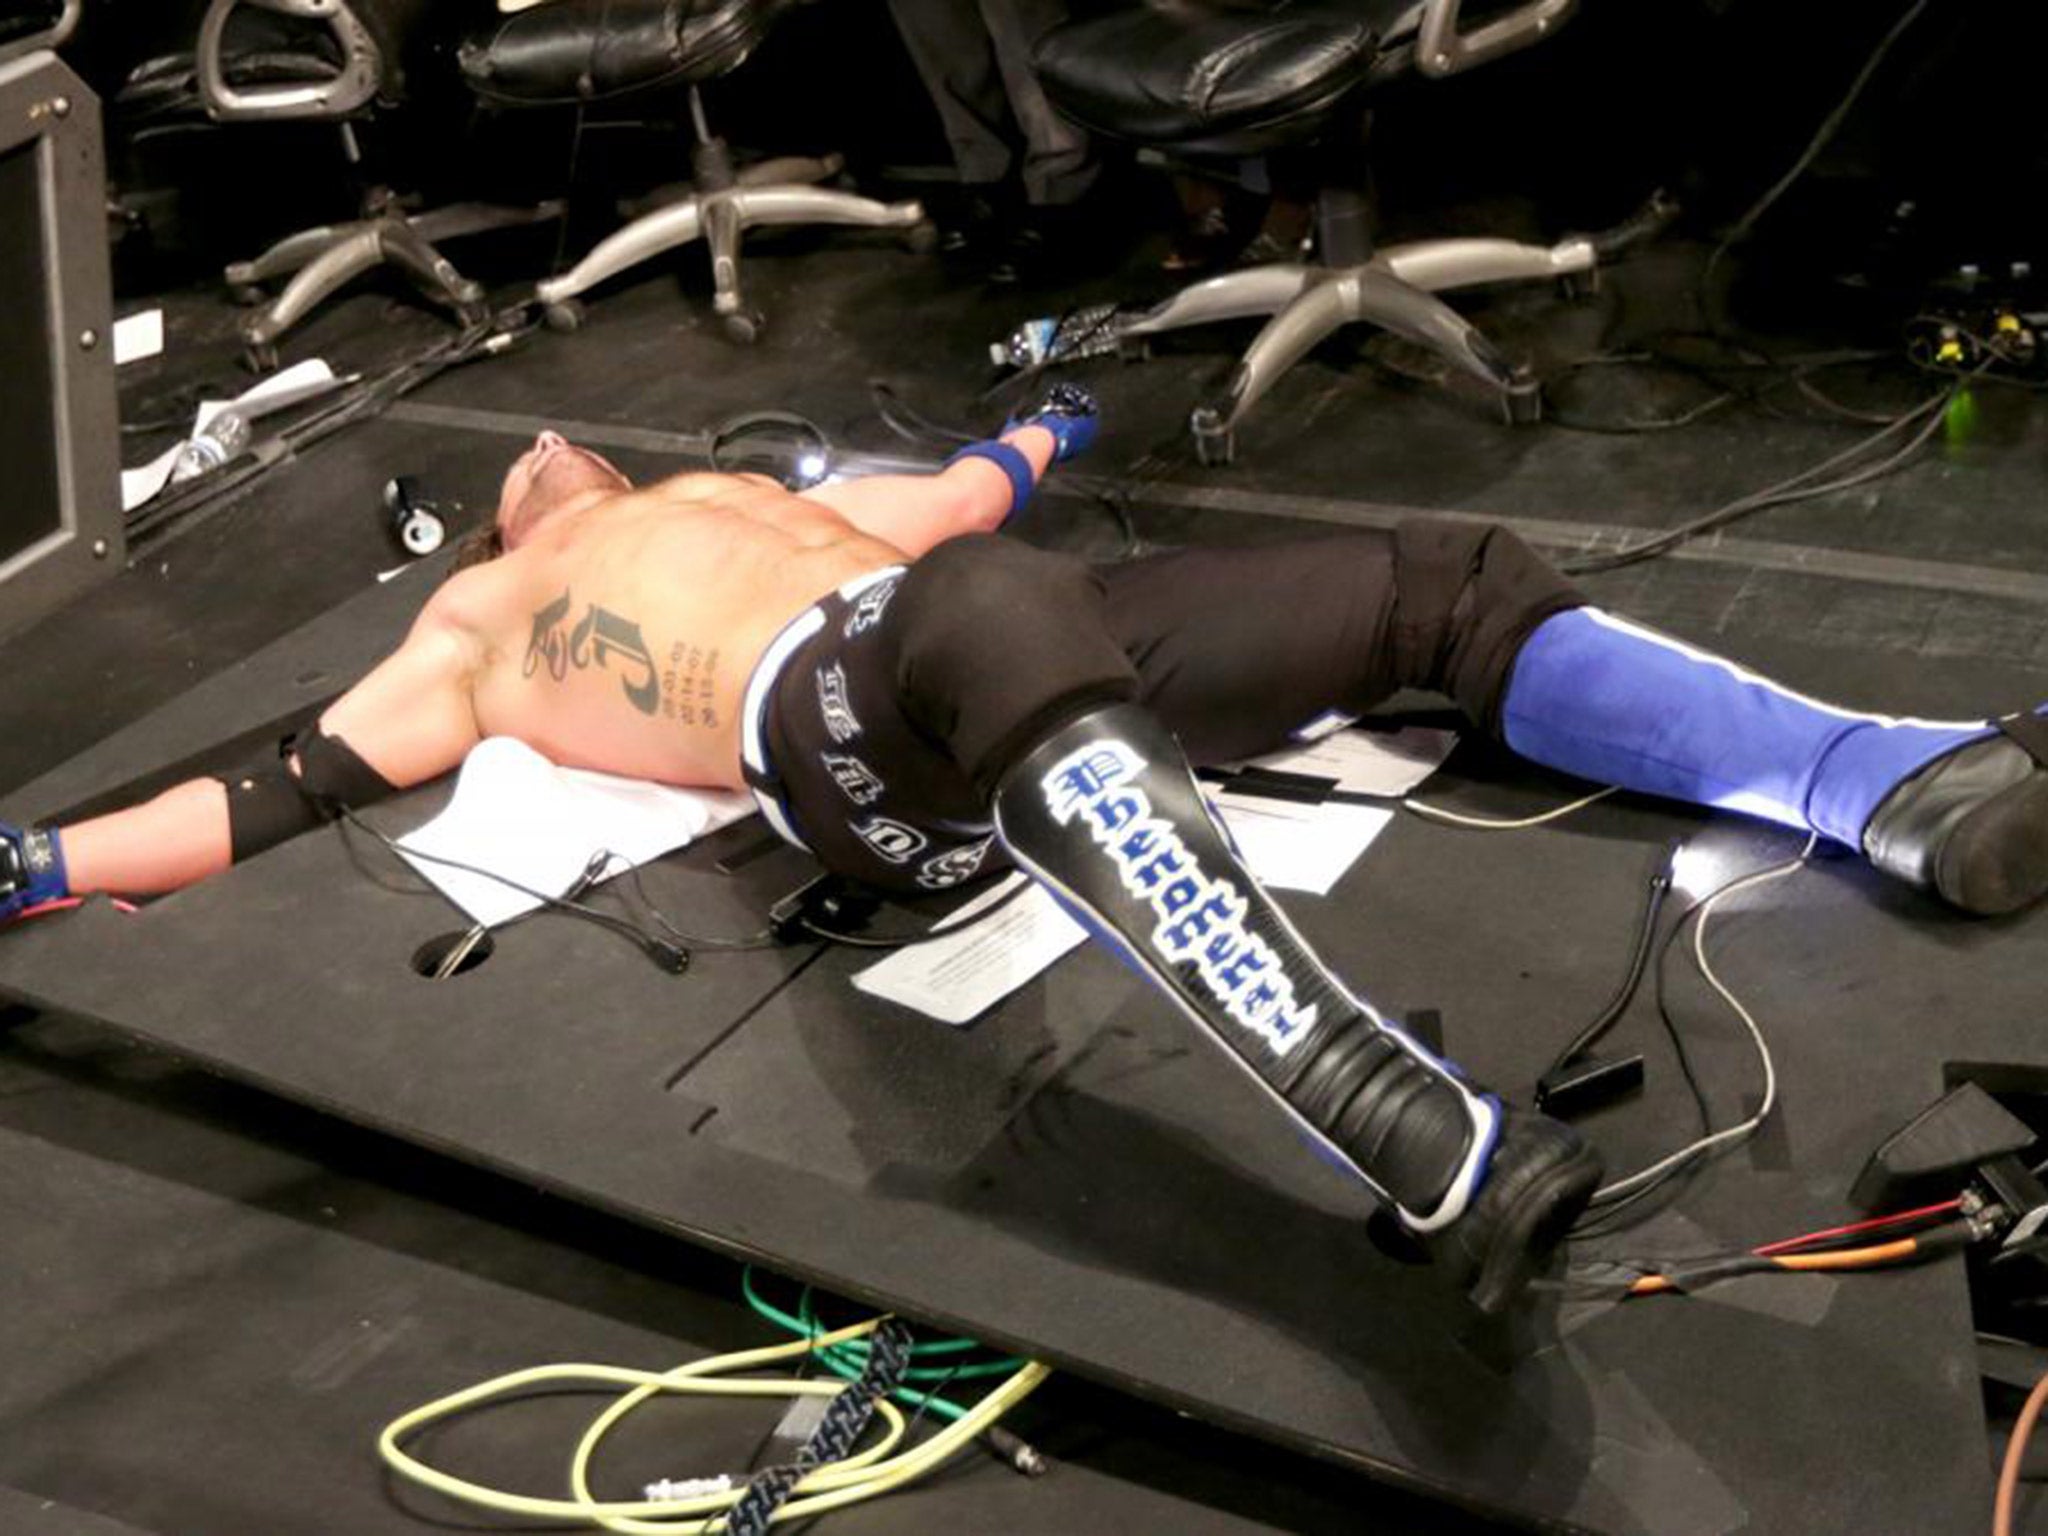 AJ Styles was back-dropped through the announcers' table